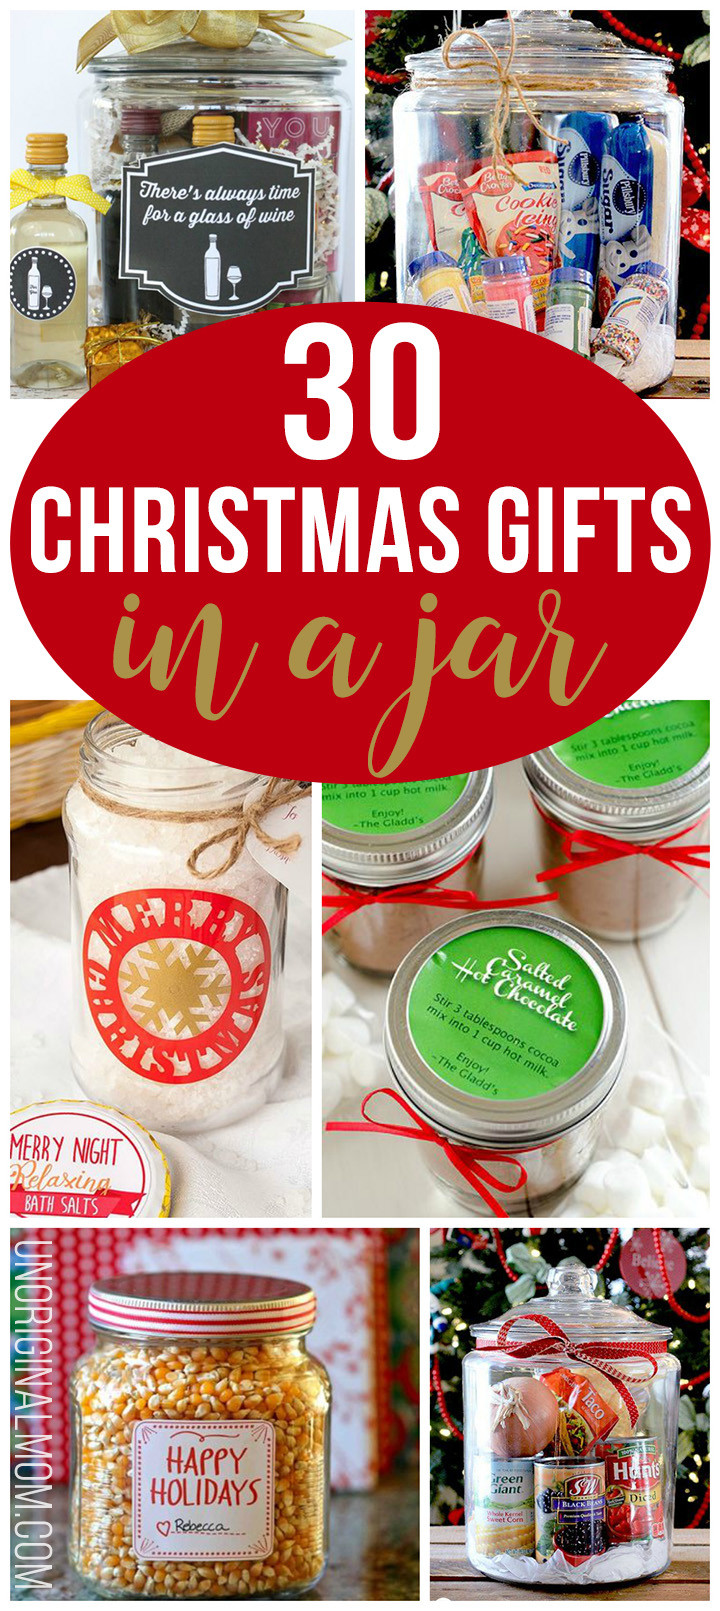 Great Holiday Gift Ideas
 30 Christmas Gifts in a Jar unOriginal Mom